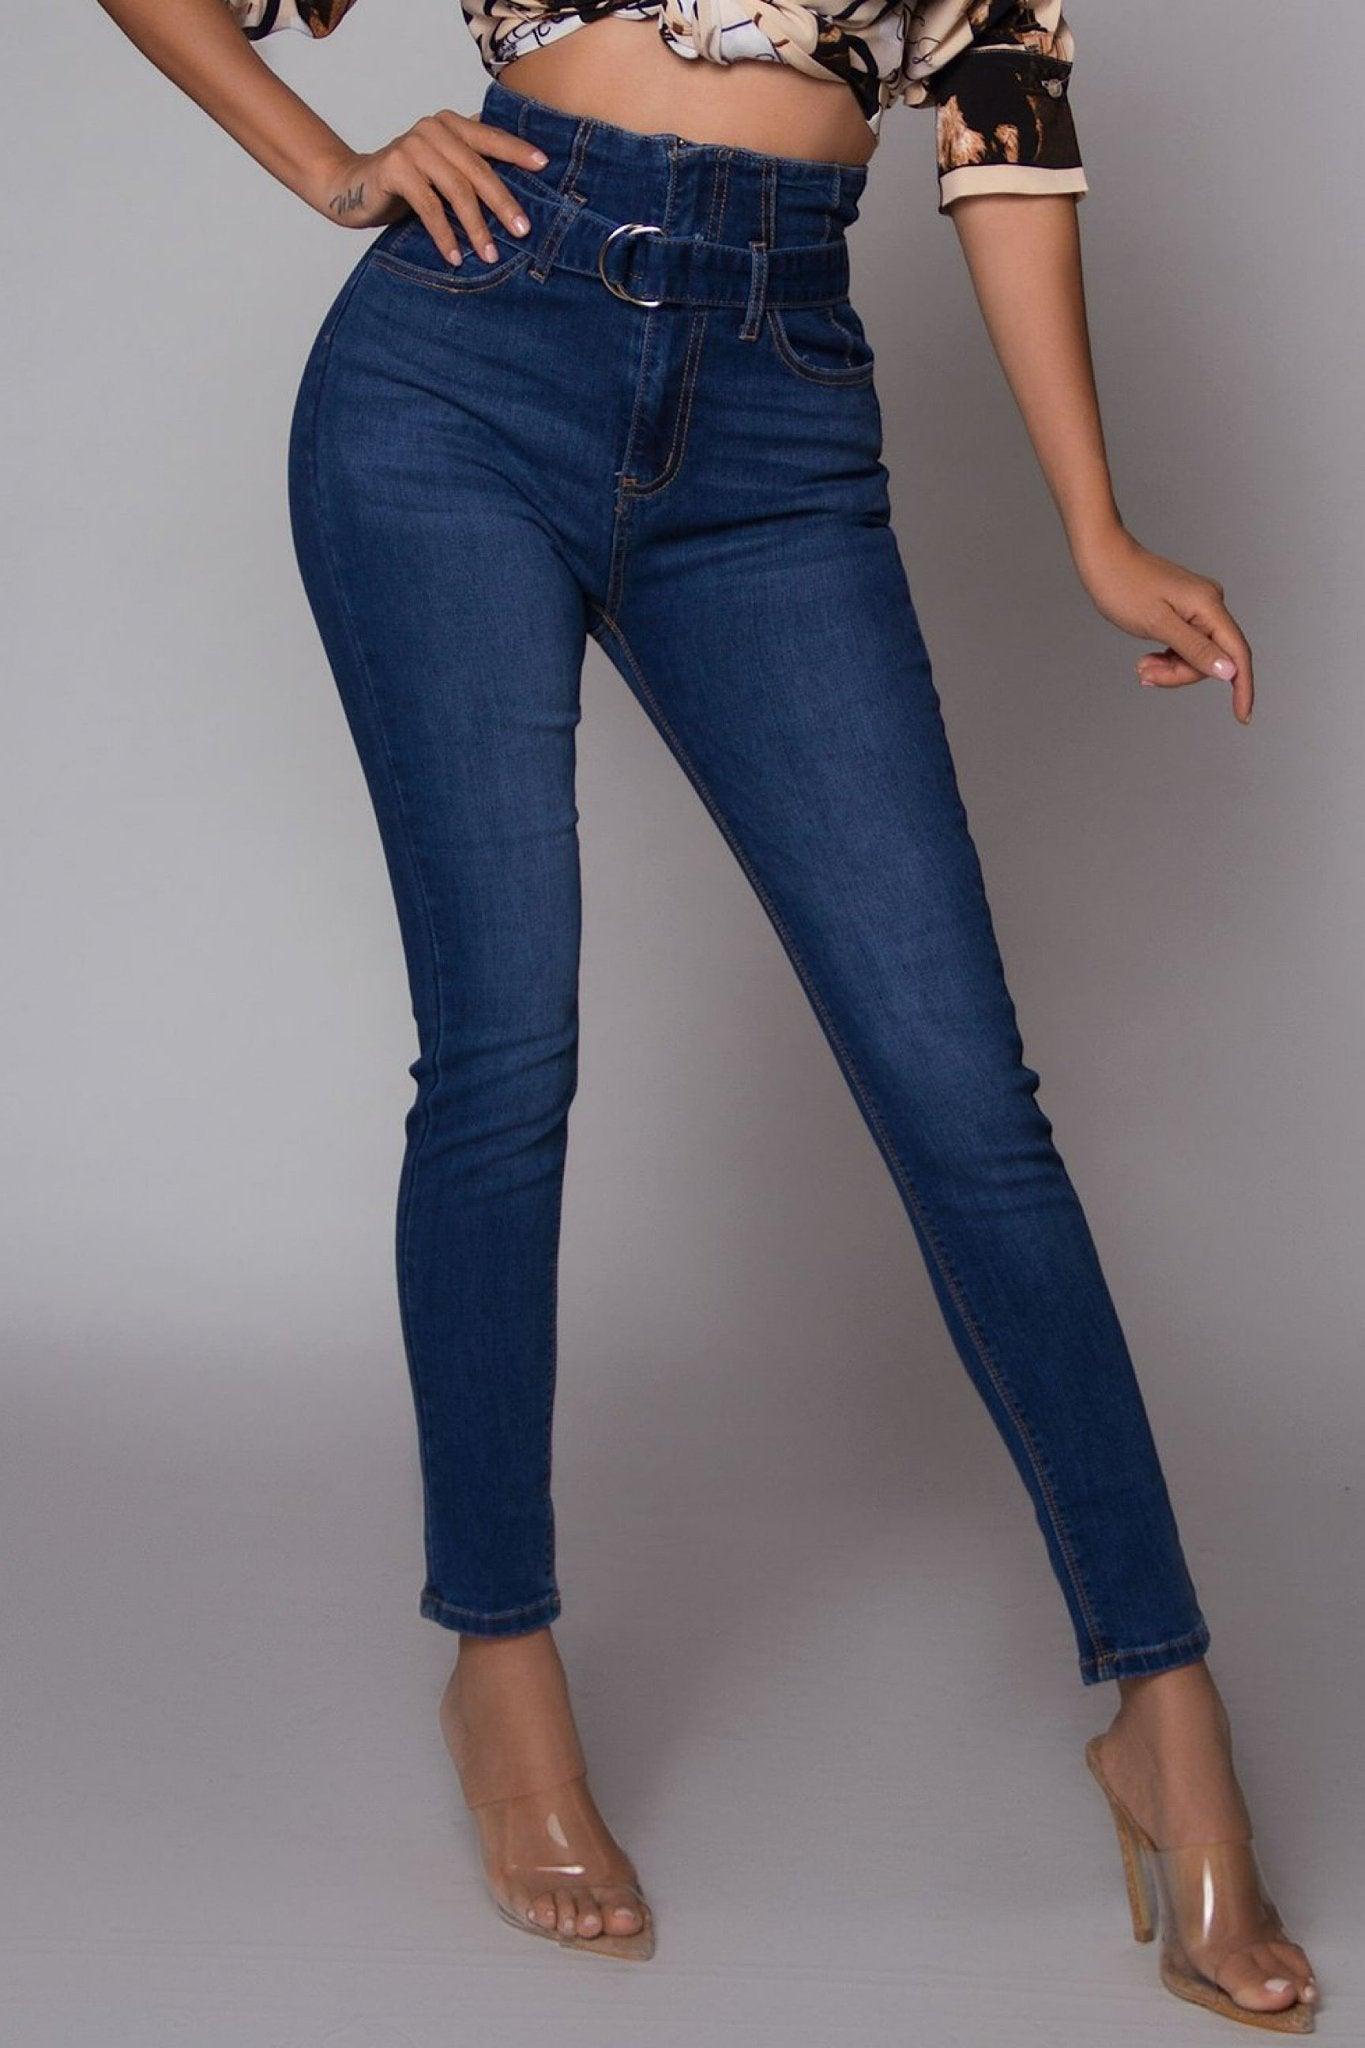 Tiana High Waisted Belted Skinny Jeans - MY SEXY STYLES